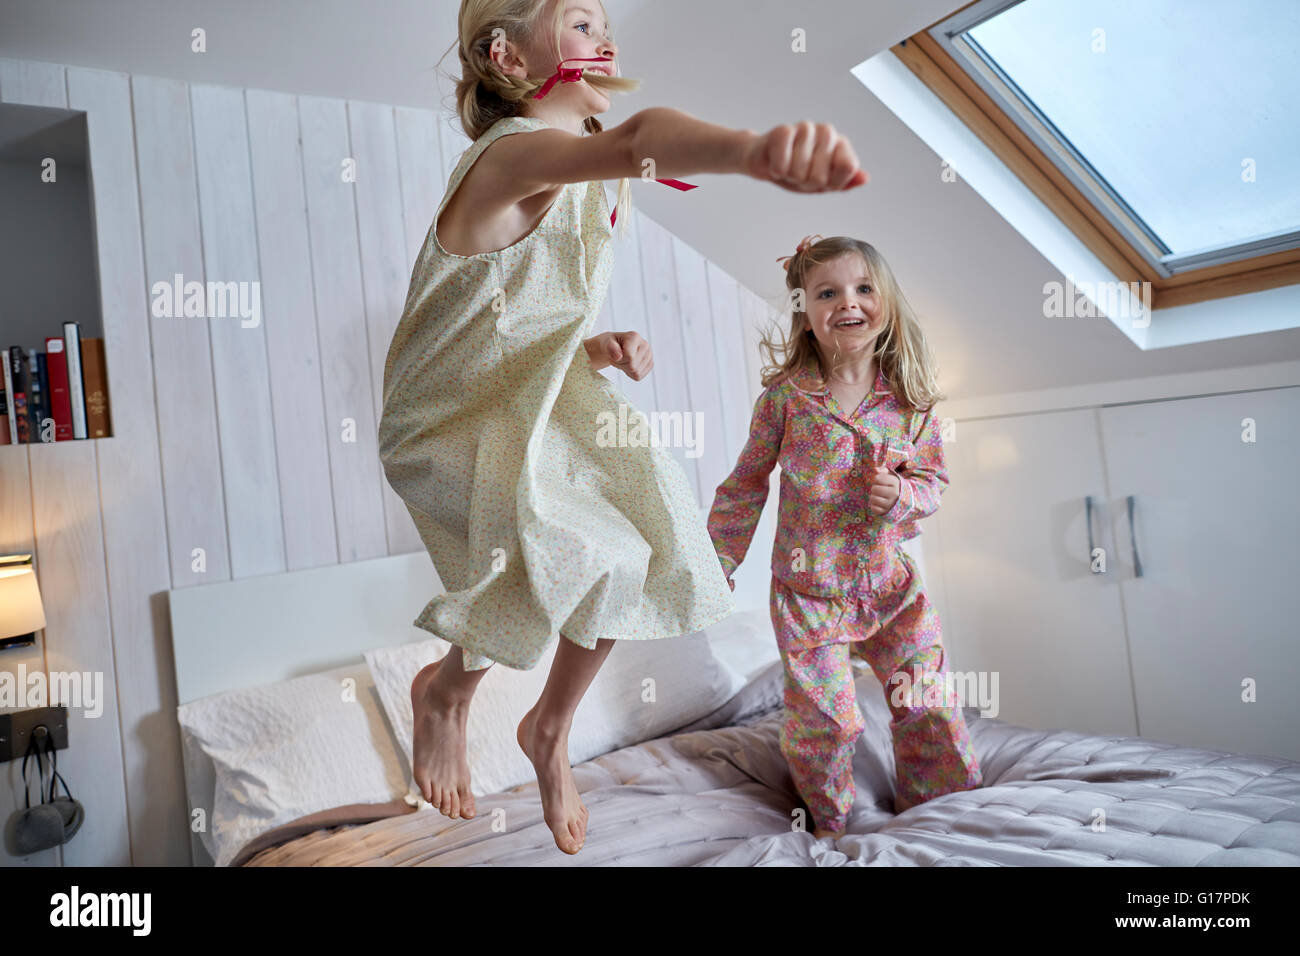 Girls jumping on bed in loft room Stock Photo